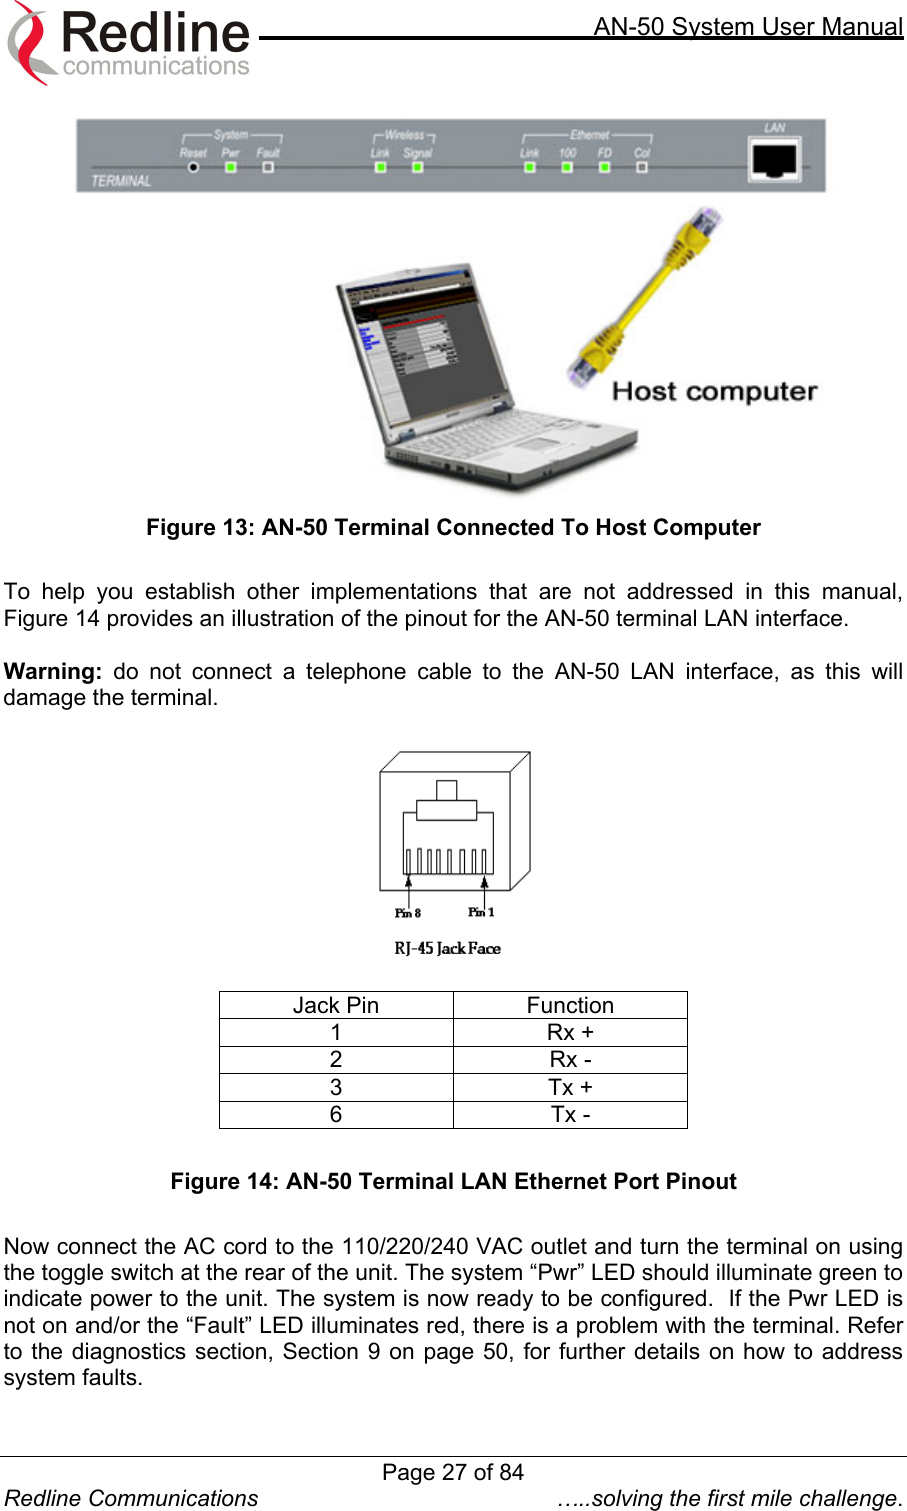     AN-50 System User Manual  Redline Communications  …..solving the first mile challenge.  Figure 13: AN-50 Terminal Connected To Host Computer  To help you establish other implementations that are not addressed in this manual, Figure 14 provides an illustration of the pinout for the AN-50 terminal LAN interface.    Warning: do not connect a telephone cable to the AN-50 LAN interface, as this will damage the terminal.    Jack Pin  Function 1 Rx + 2 Rx - 3 Tx + 6 Tx -  Figure 14: AN-50 Terminal LAN Ethernet Port Pinout  Now connect the AC cord to the 110/220/240 VAC outlet and turn the terminal on using the toggle switch at the rear of the unit. The system “Pwr” LED should illuminate green to indicate power to the unit. The system is now ready to be configured.  If the Pwr LED is not on and/or the “Fault” LED illuminates red, there is a problem with the terminal. Refer to the diagnostics section, Section 9 on page 50, for further details on how to address system faults.    Page 27 of 84